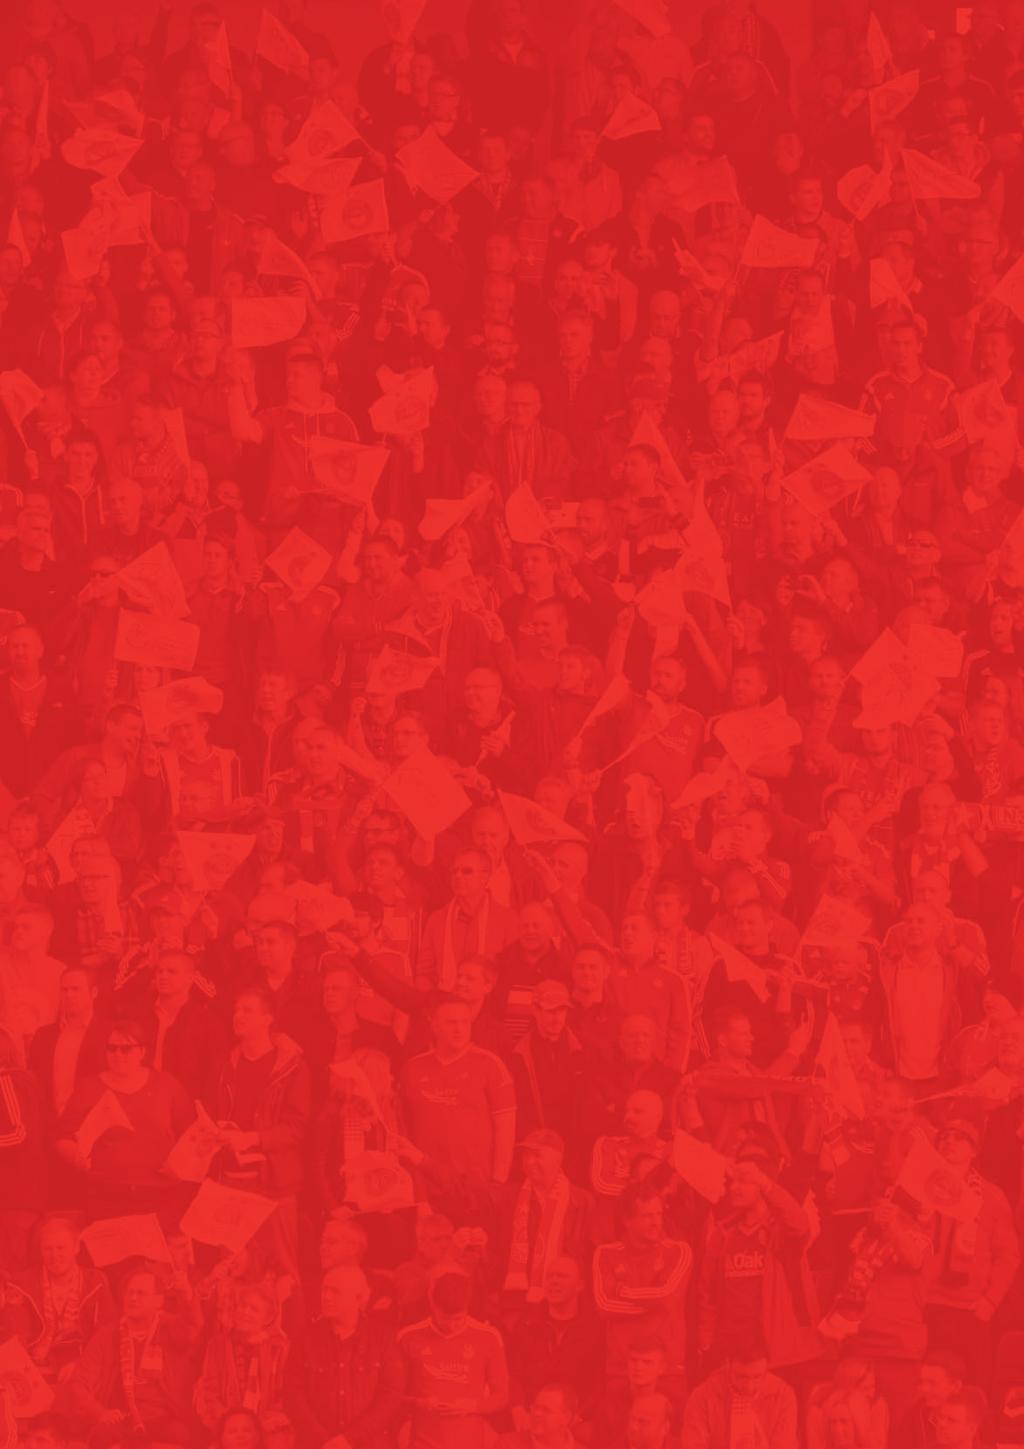 SEASON TICKET HOLDER BENEFITS As a season ticket holder at Pittodrie you will enjoy access to all home Ladbrokes Premiership matches along with the following fantastic benefits: 40 Loyalty Points